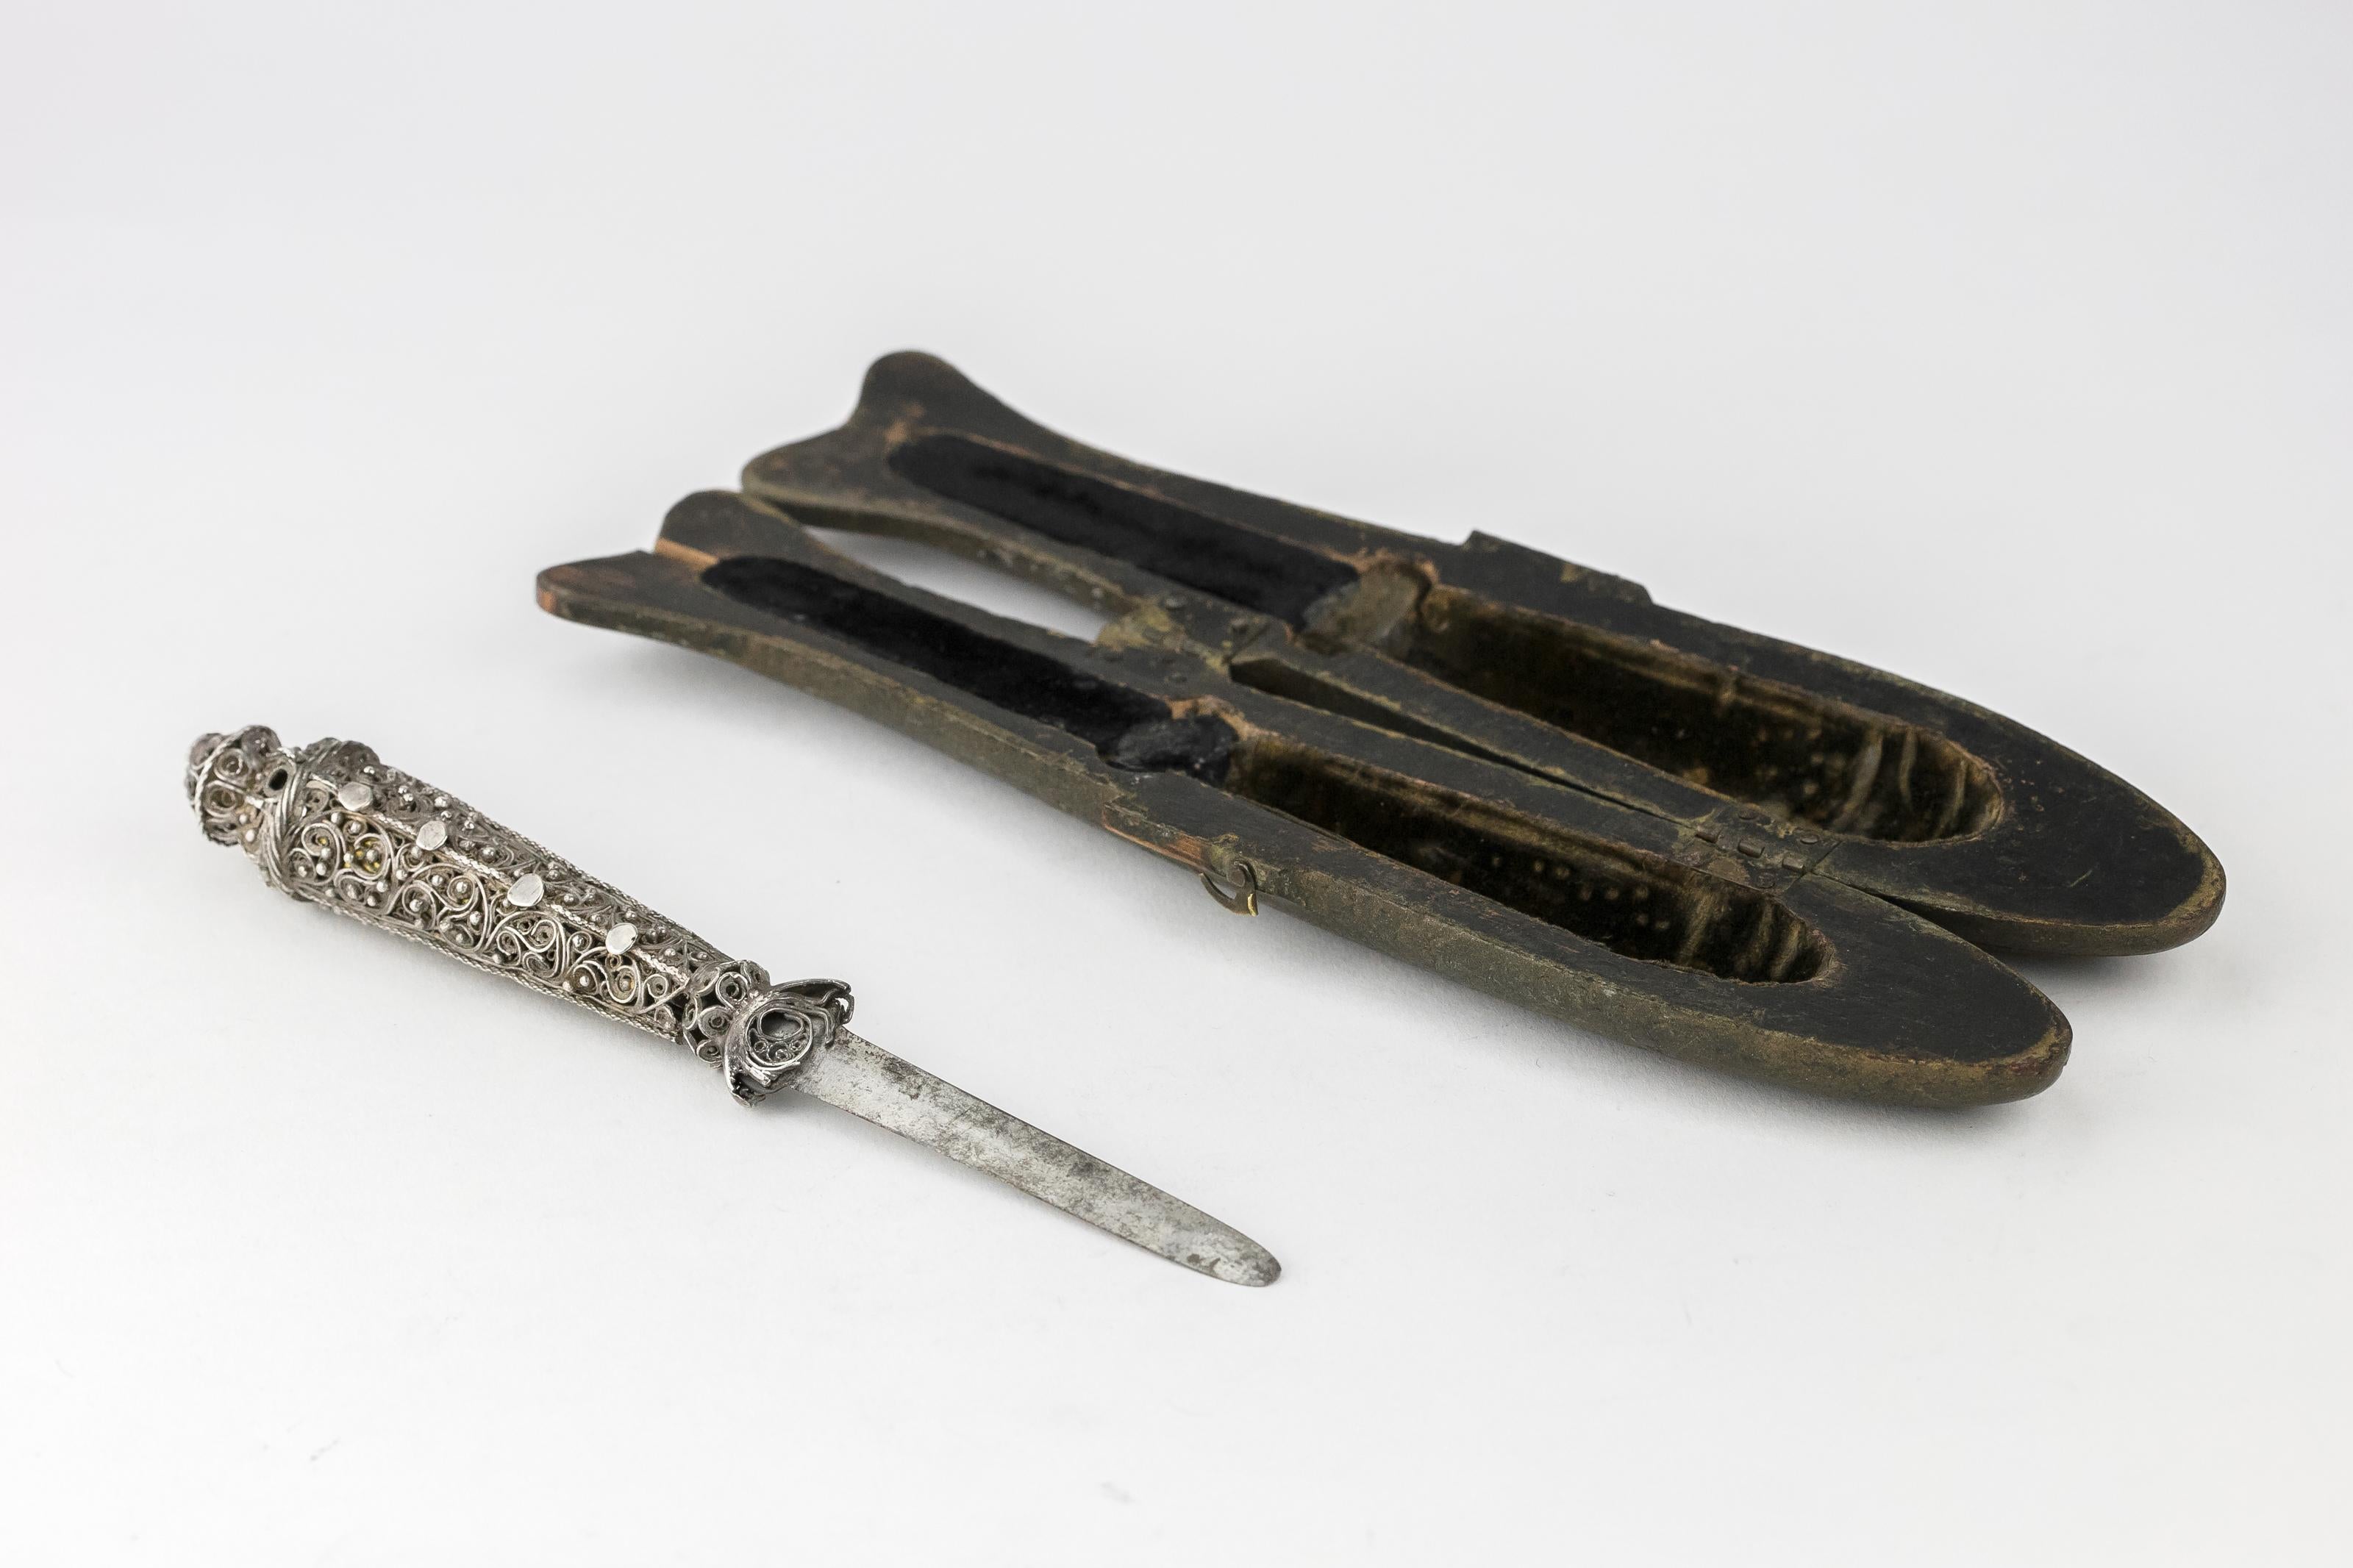 Circumcision knife in the original case. Galicia, early 19th century, circa 1810.
Filigree silver; steel; wooden case; velvet lining. Knife with a handle made of silver filigree and granulation. At the tip of the handle is a ball set with a red